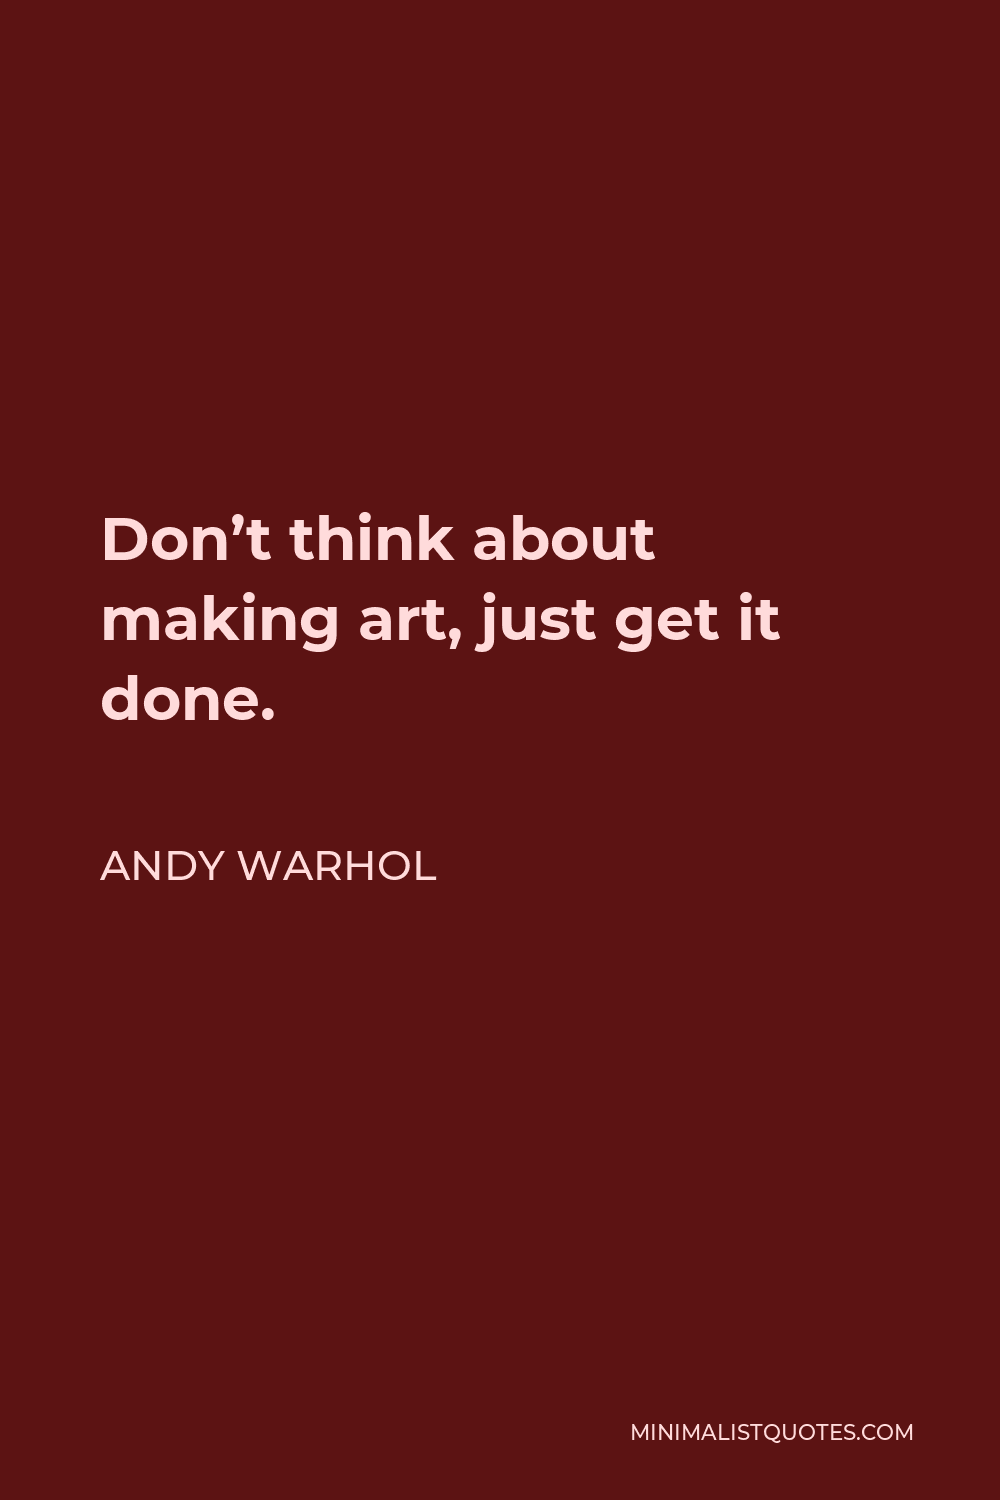 Andy Warhol Quote - Don’t think about making art, just get it done.